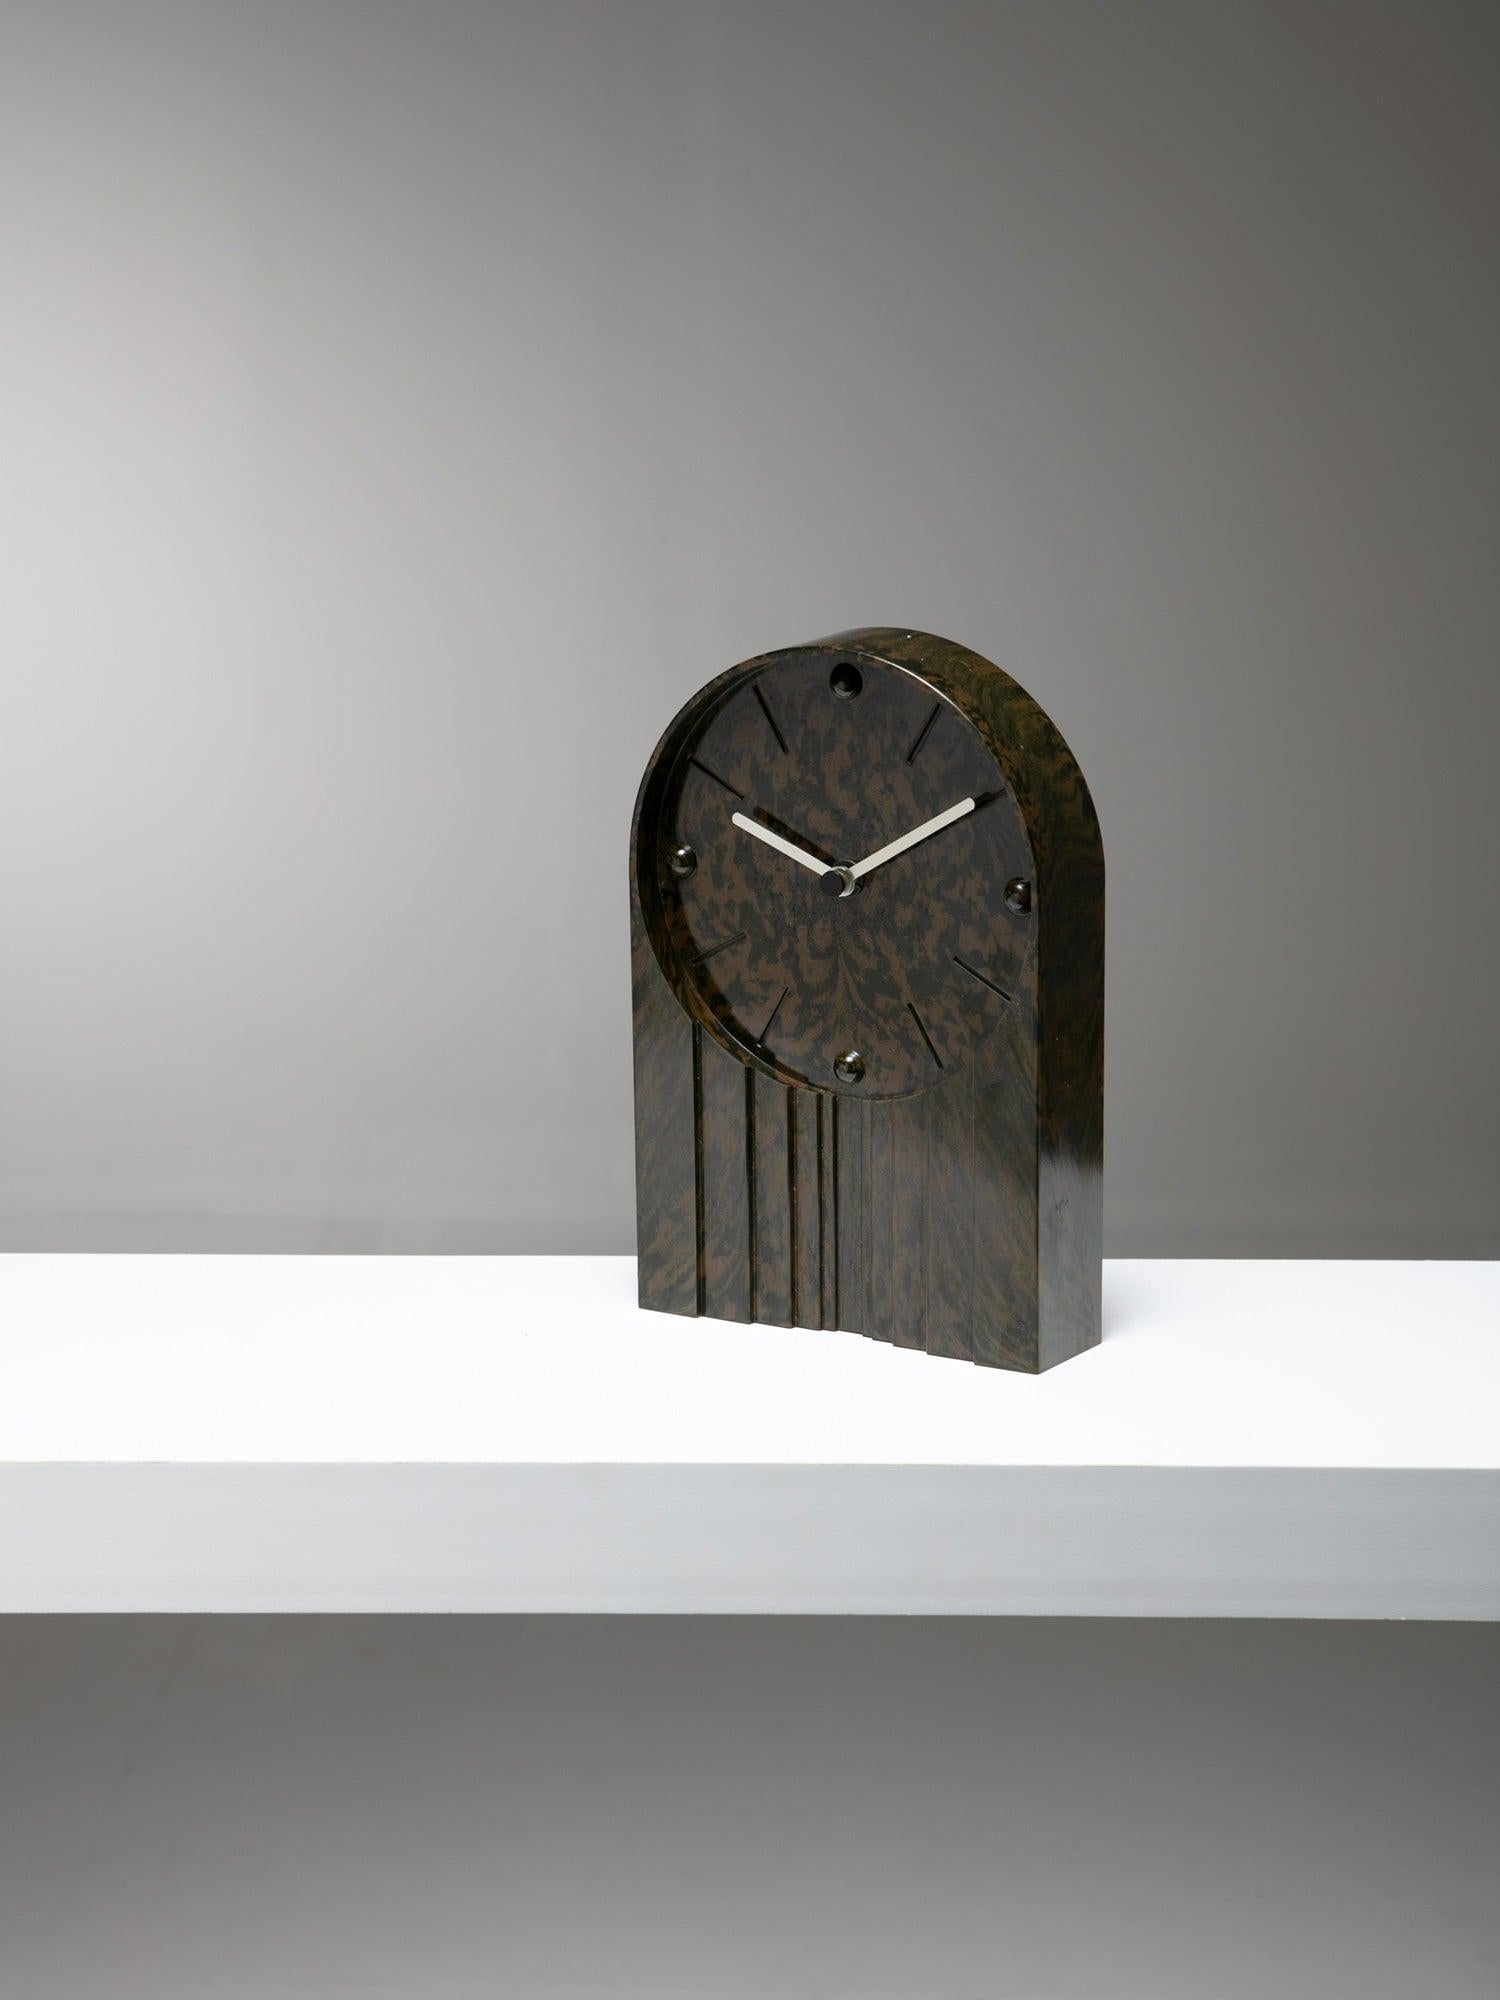 Unusual table clock with Deco shape and bakelite surface pattern